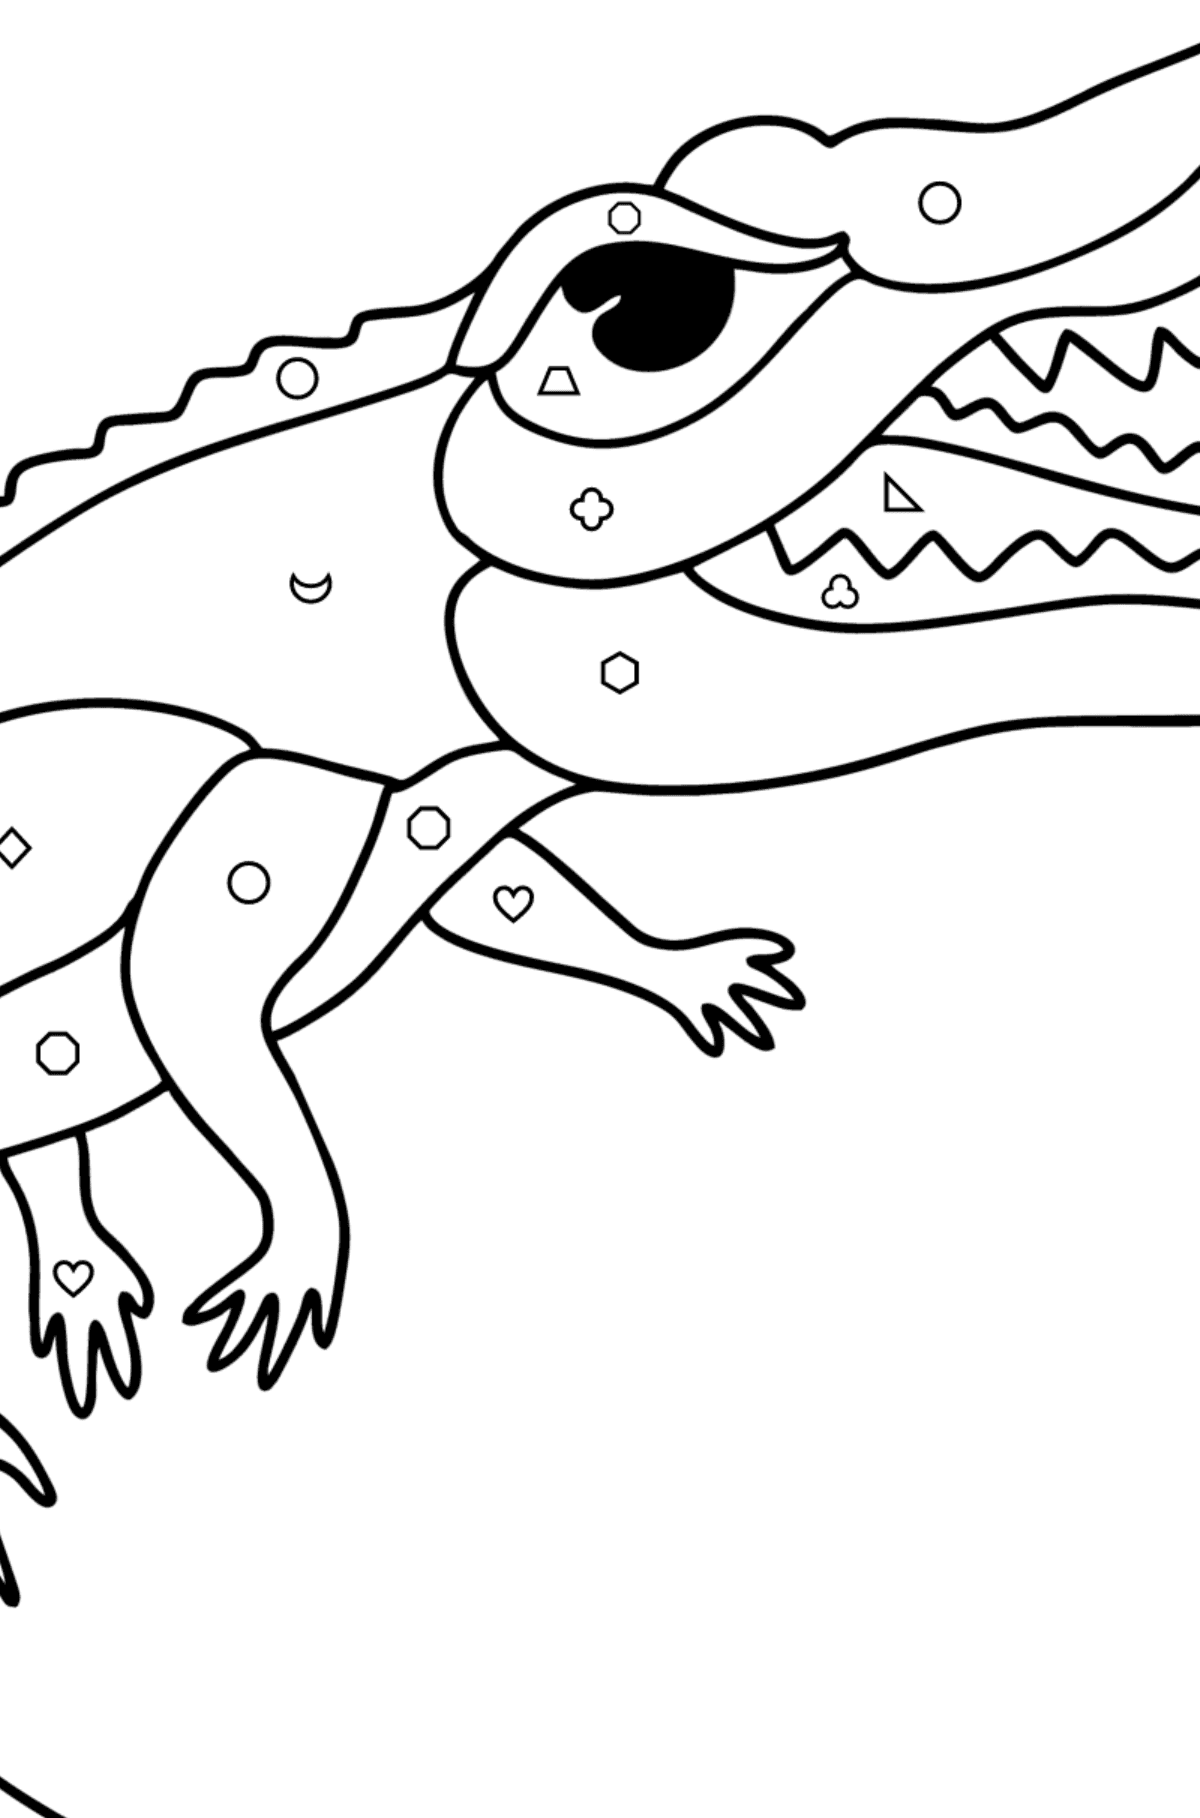 Saltwater Crocodile сoloring page - Coloring by Geometric Shapes for Kids